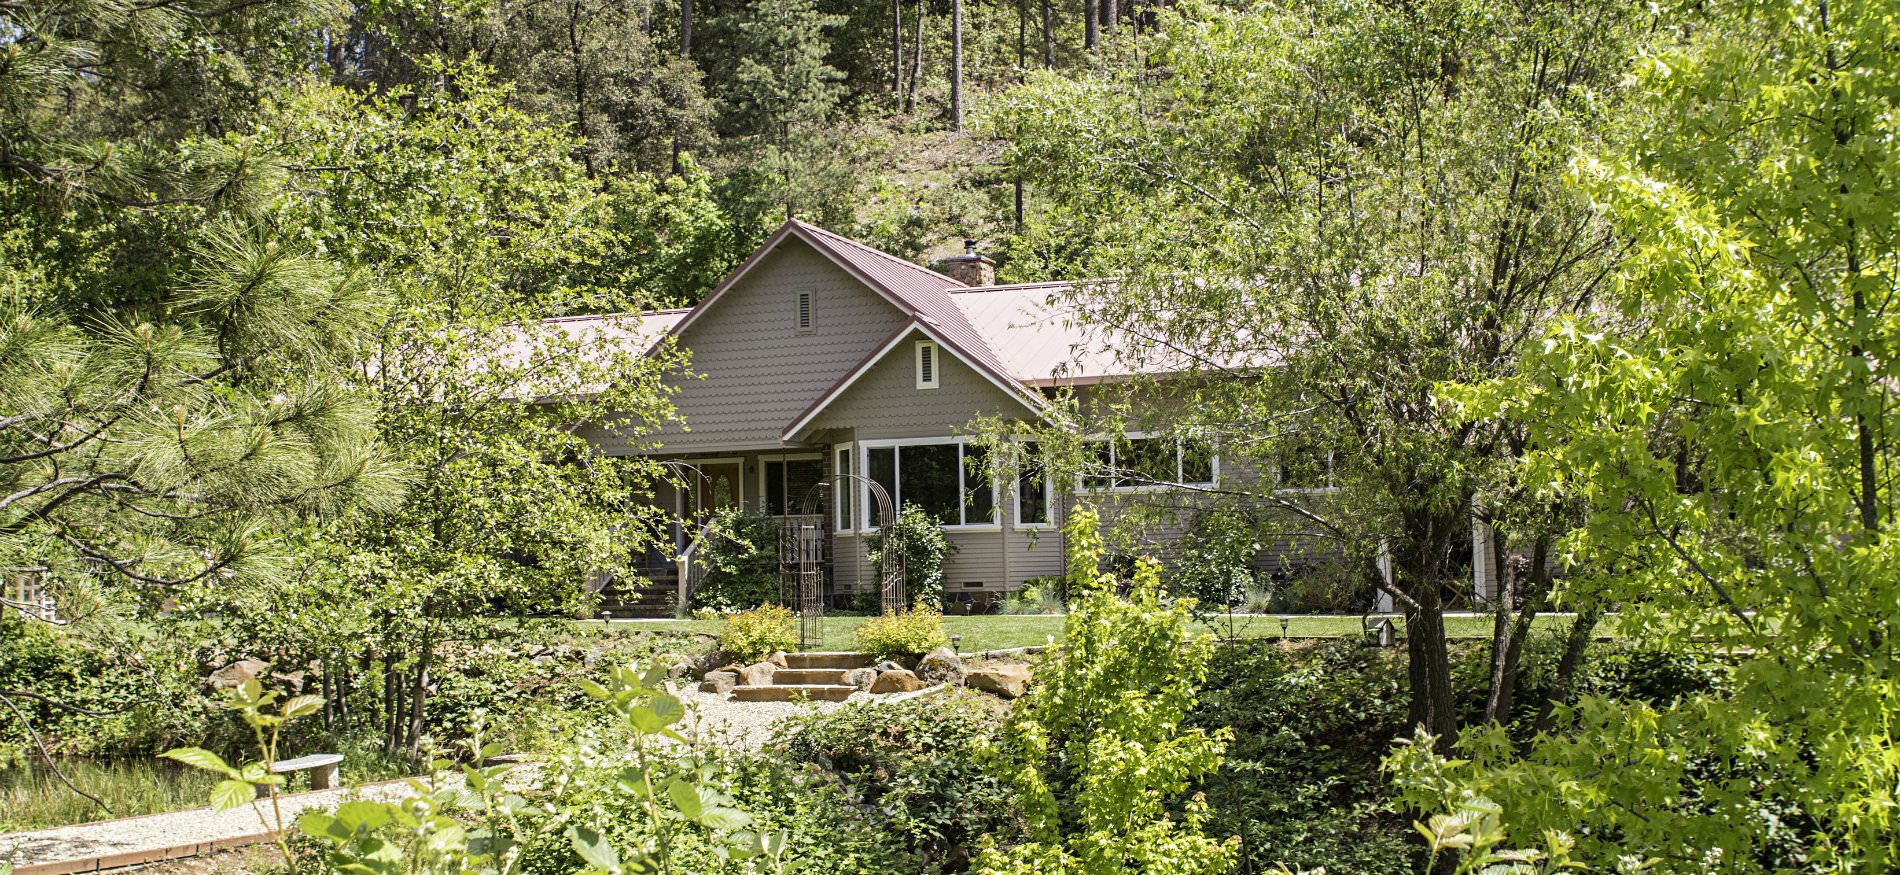 Exterior view of tan cottage with gable roof completely surrounded by a variety of lush green plants and trees